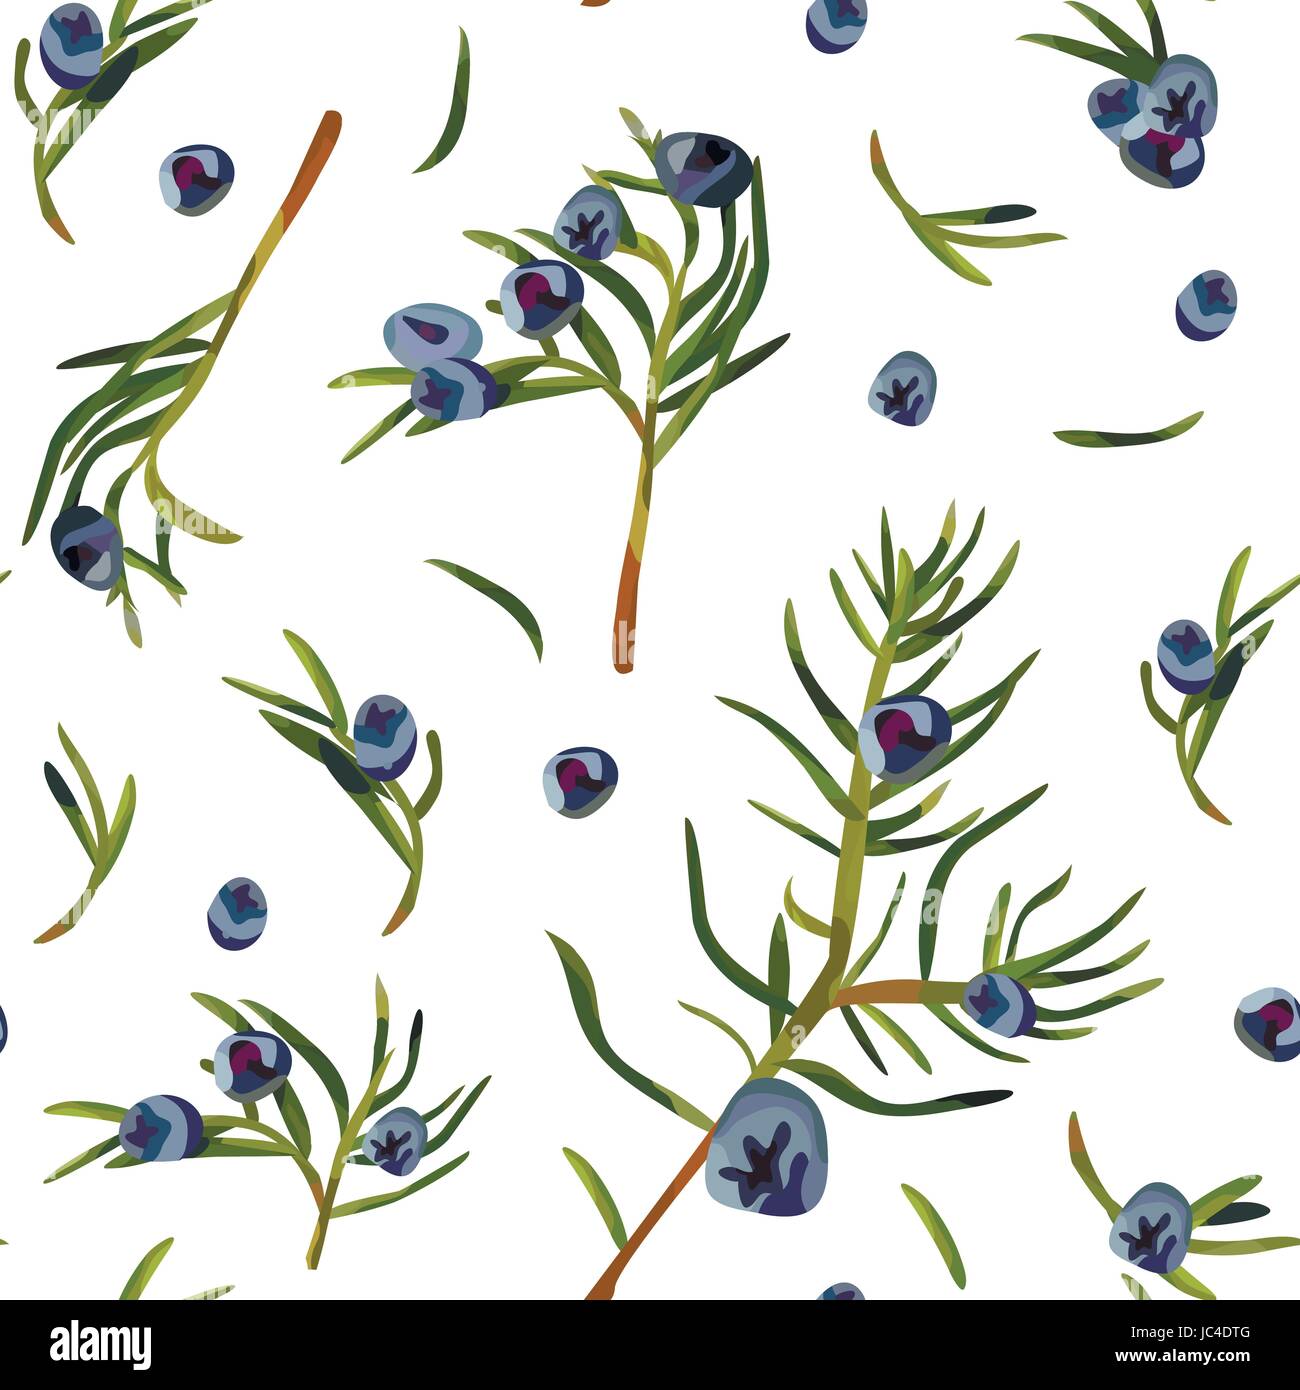 Juniper Branch with Leaves and Berries Seamless Pattern background. Medicinal plant Wallpaper in Watercolor style. Traditional herbal therapy. Vector Stock Vector